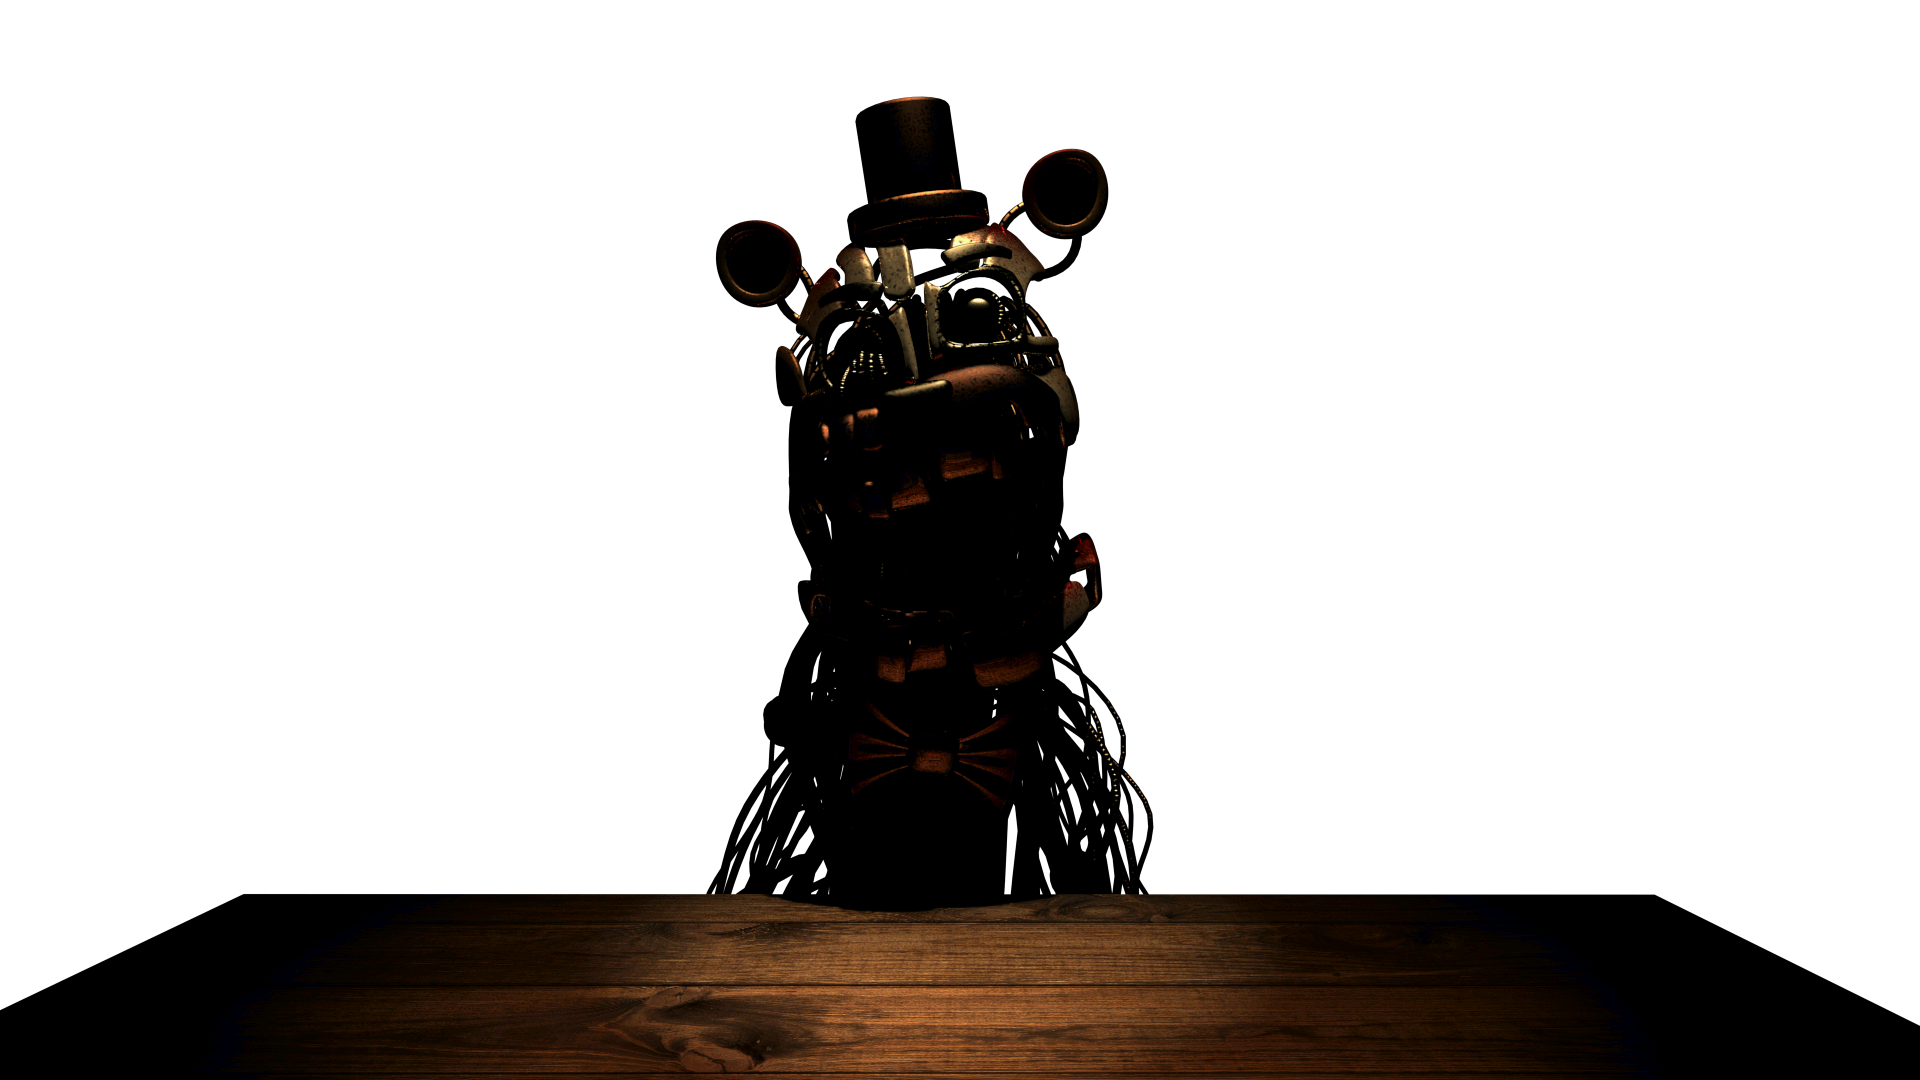 FNAF/SFM] FNAF6 Funtime Chica Salvage - View from animatronic